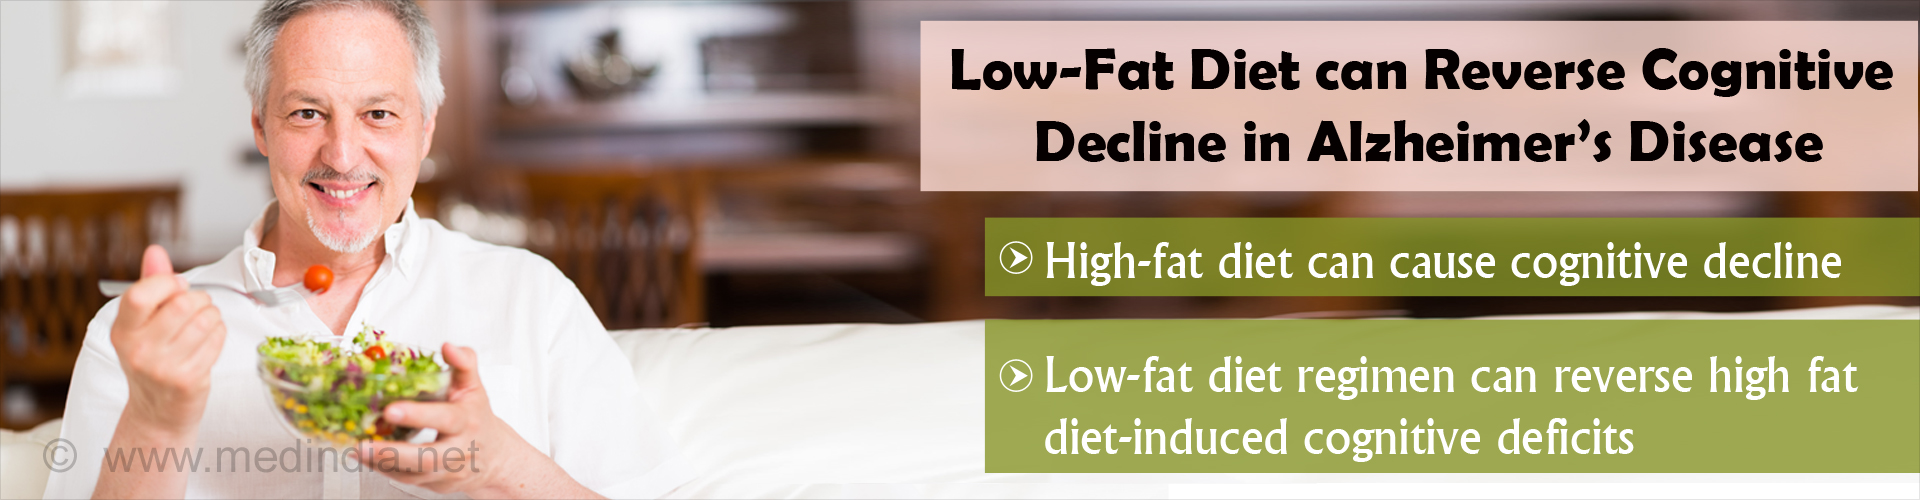 Low-fat diet can reverse cognitive decline in Alzheimer's Disease
- High-fat diet can cause cognitive decline
- Low-fat diet regimen can reverse high fat diet-induced cognitive deficits